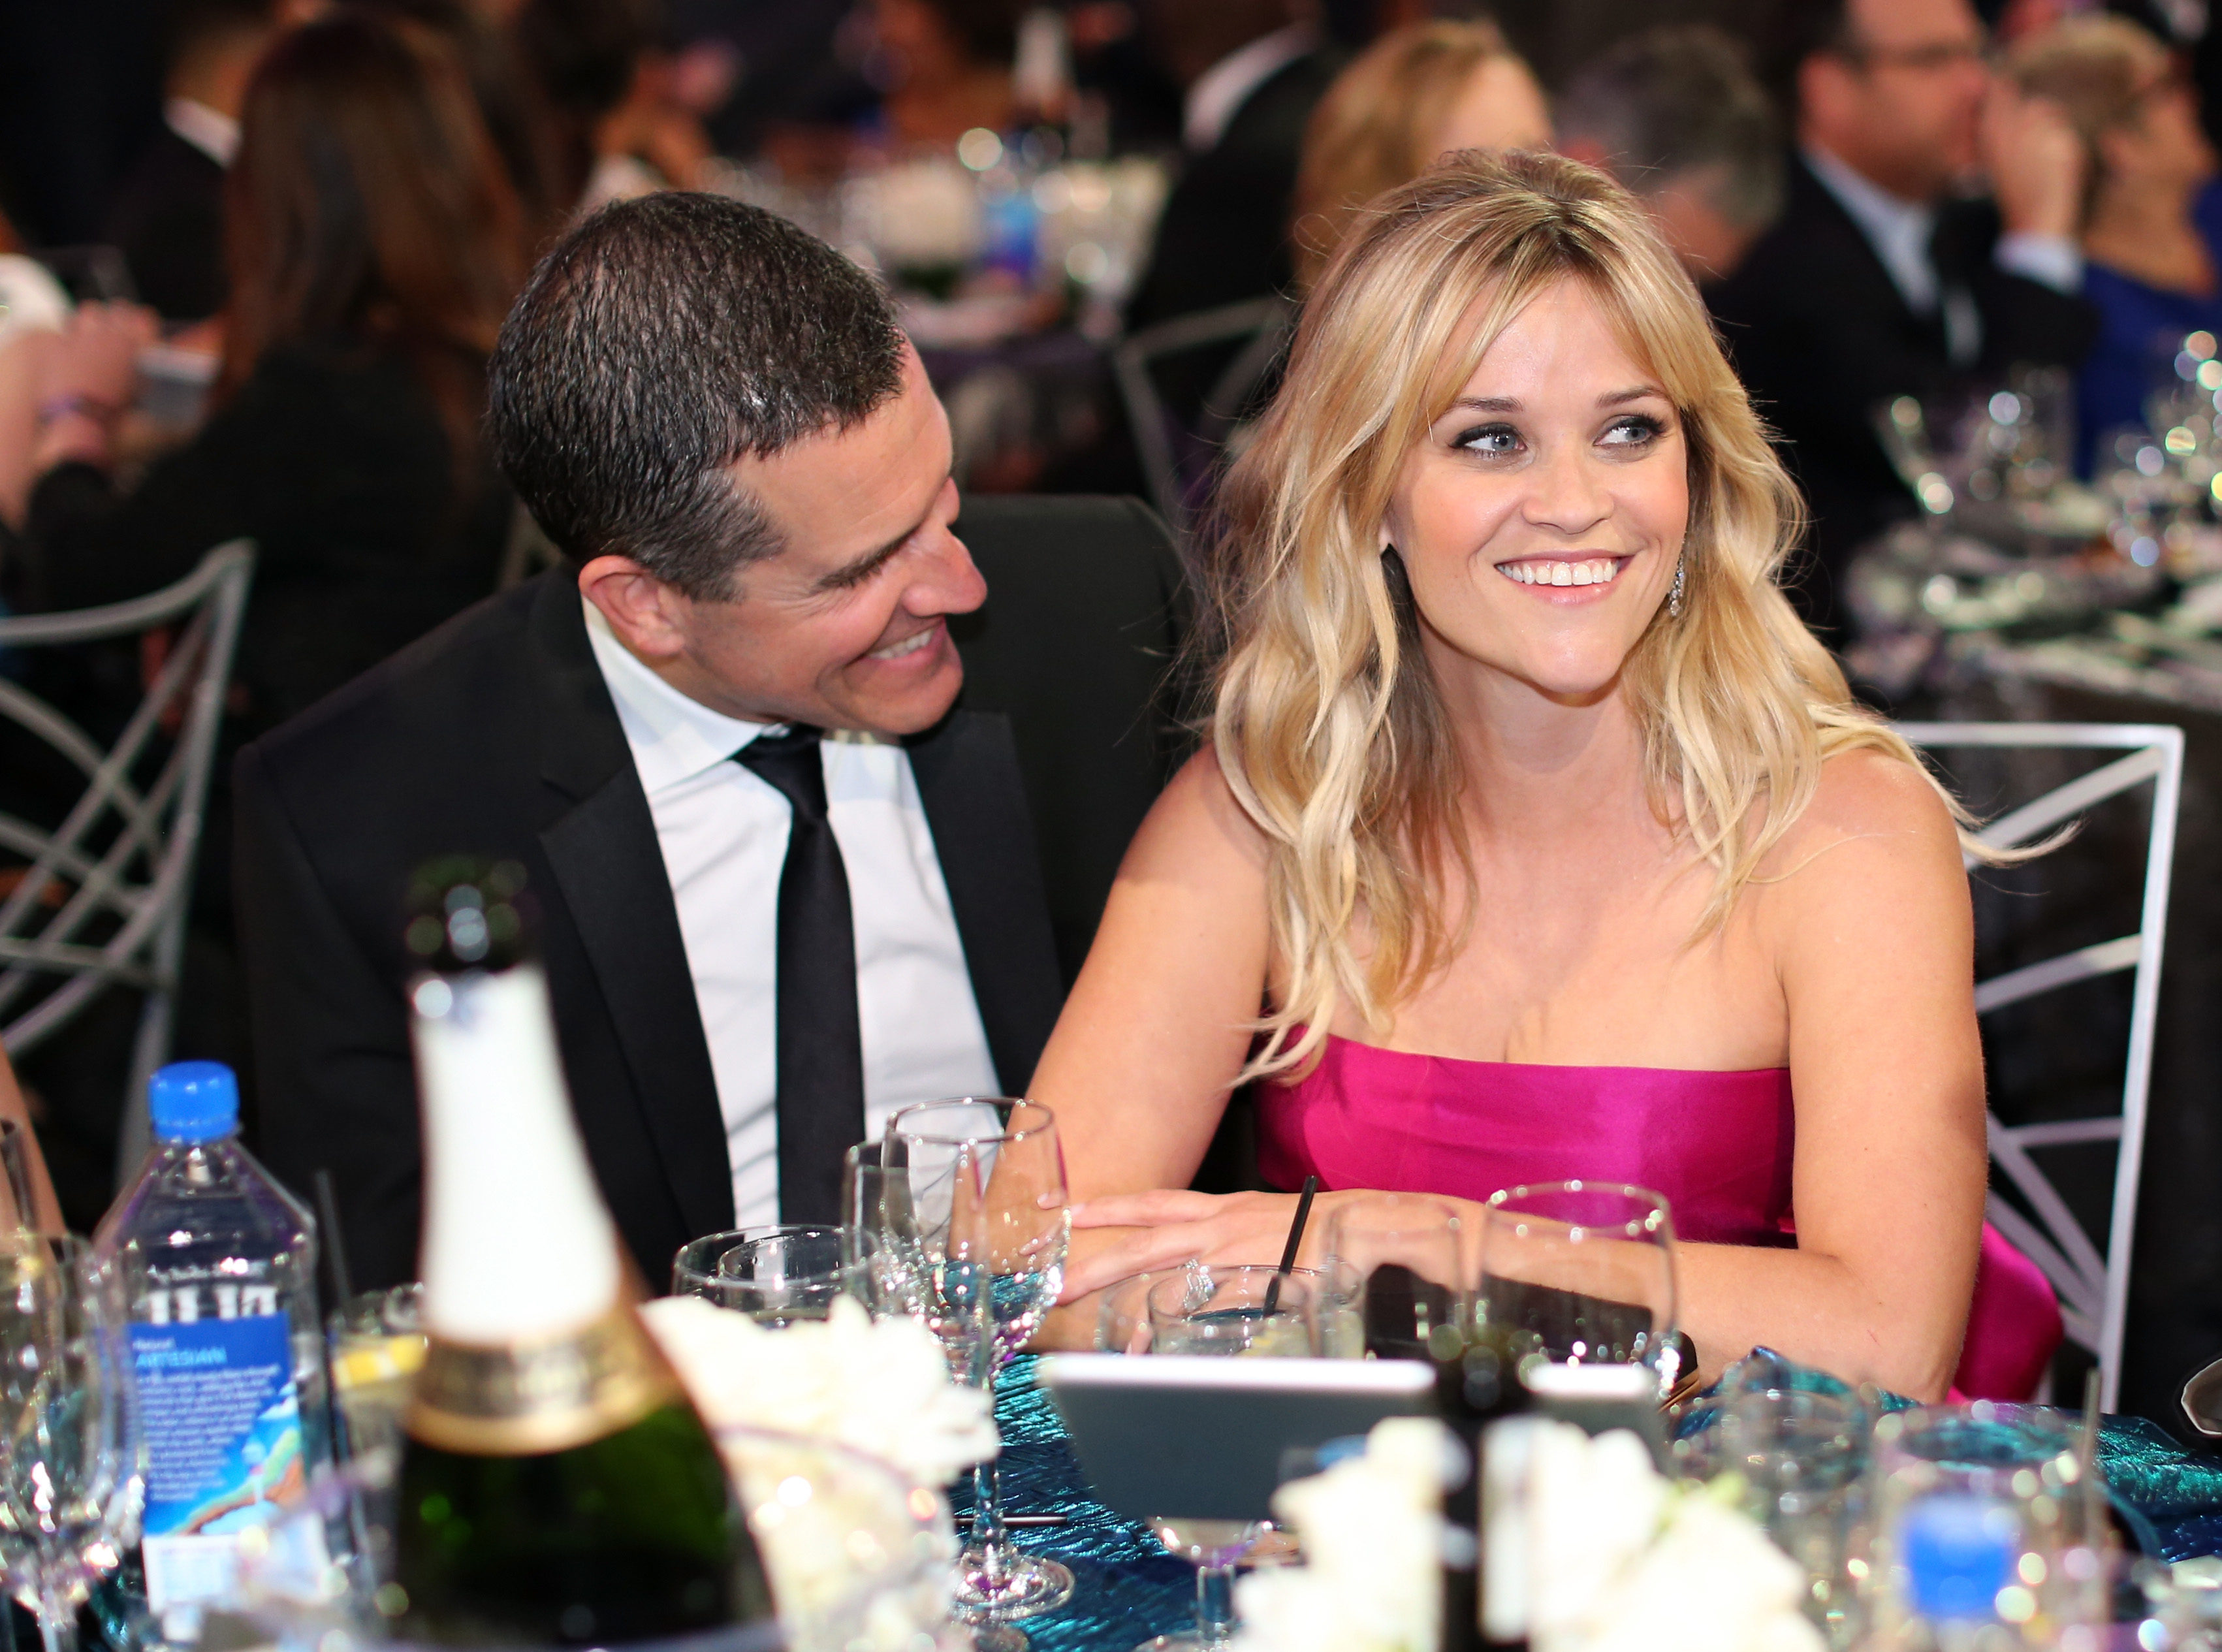 Close-up of Reese and Jim sitting at a table and smiling